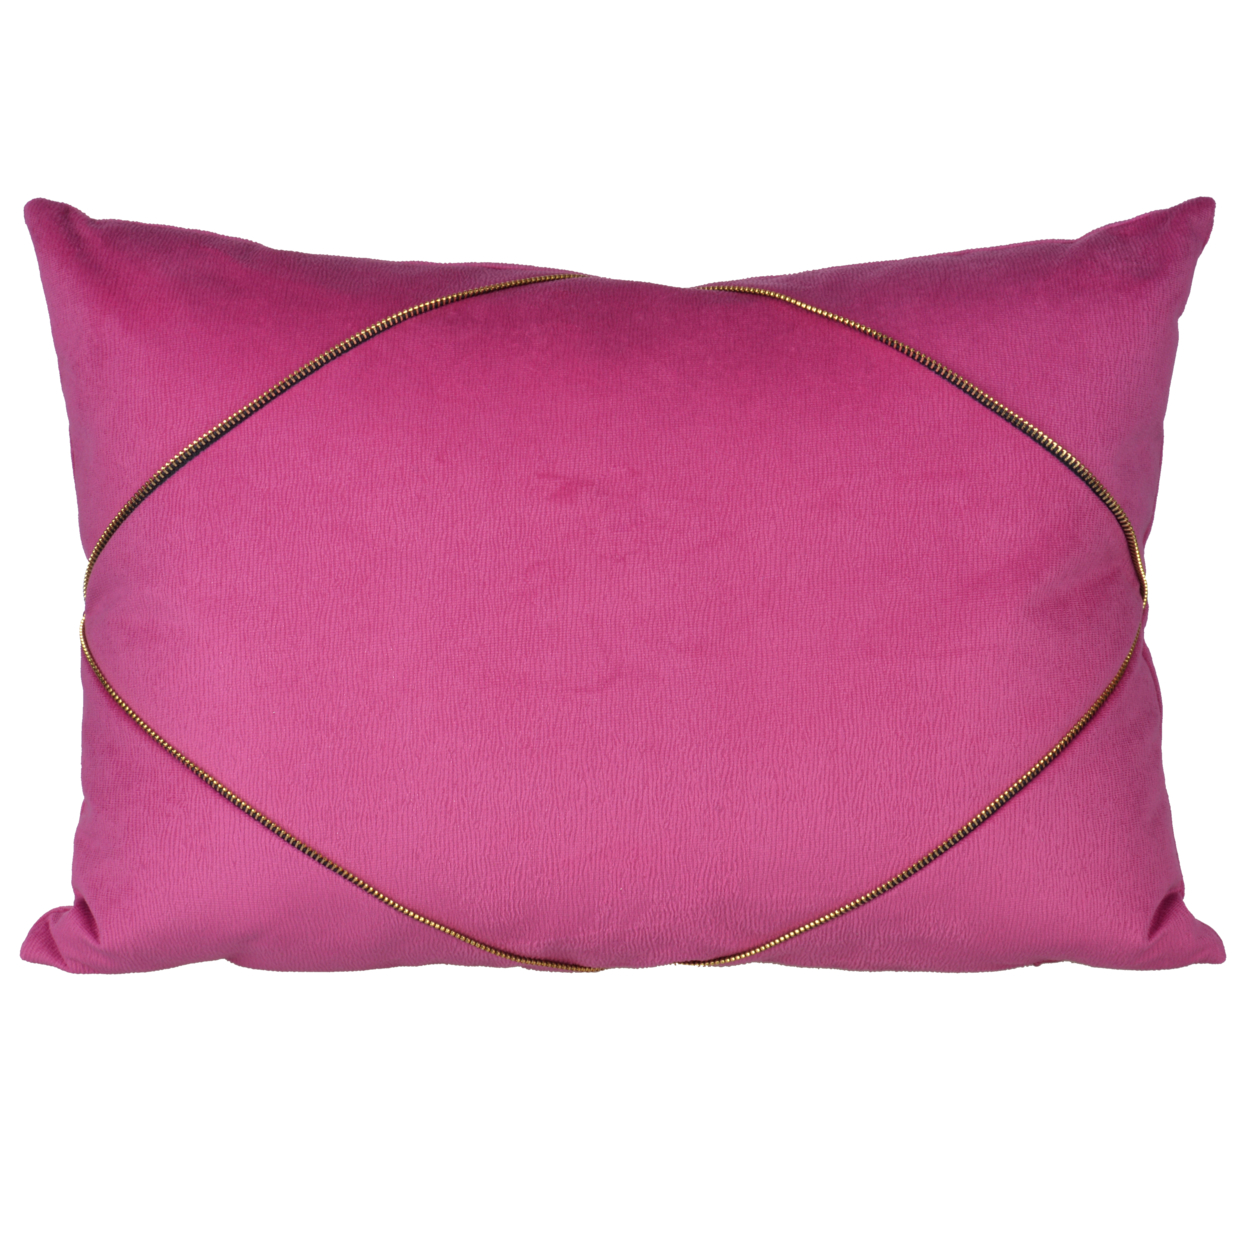 20 X 14 Inch Polyester Pillow With Zipper Accent, Set Of 2, Pink- Saltoro Sherpi